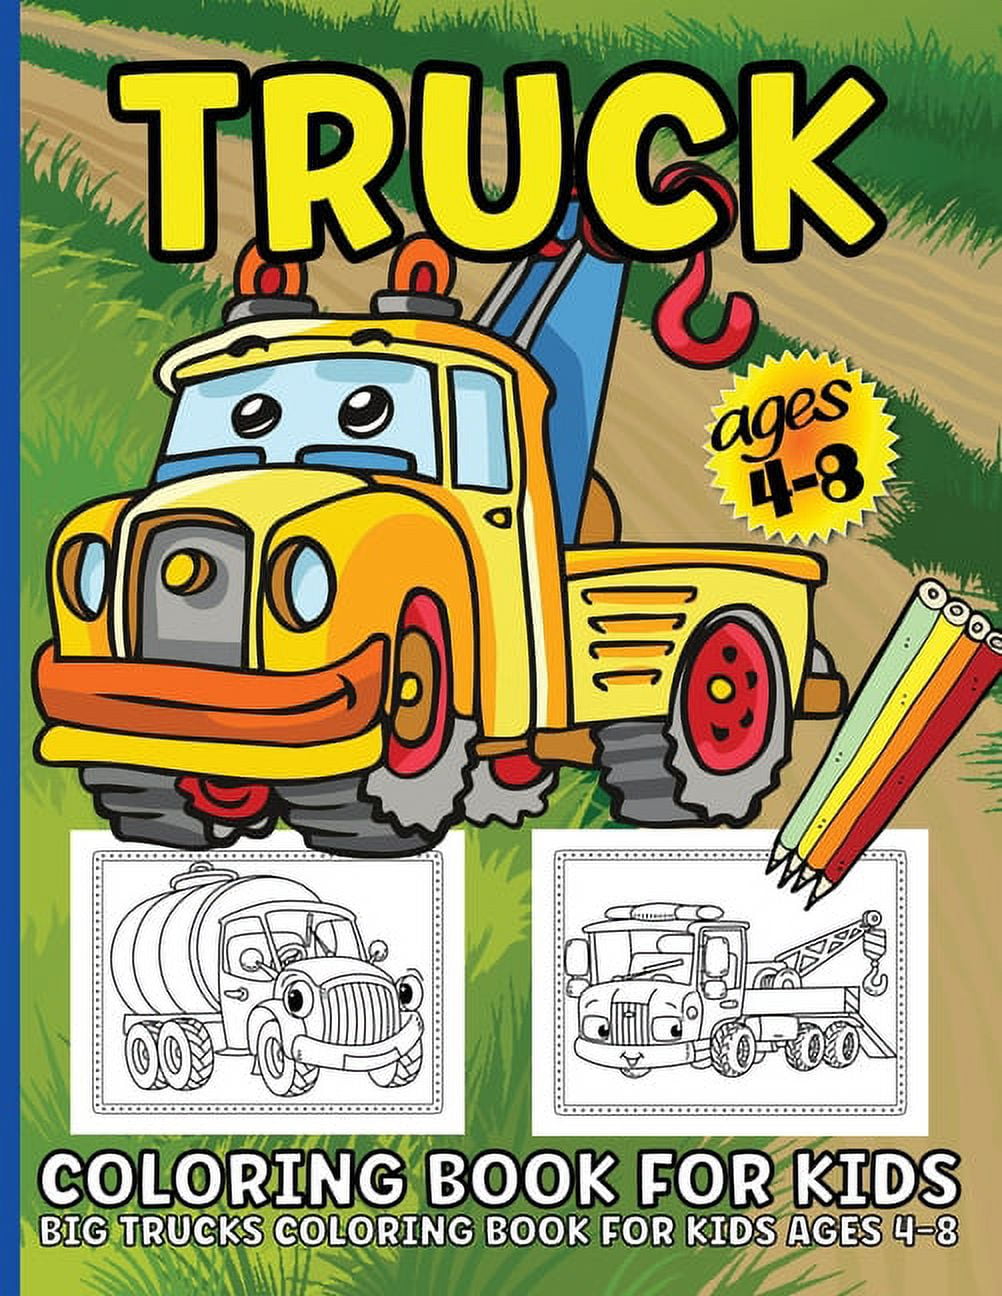 Fun Coloring Book for teen - Scary Truck Crashes - Many colouring pages  (Paperback)